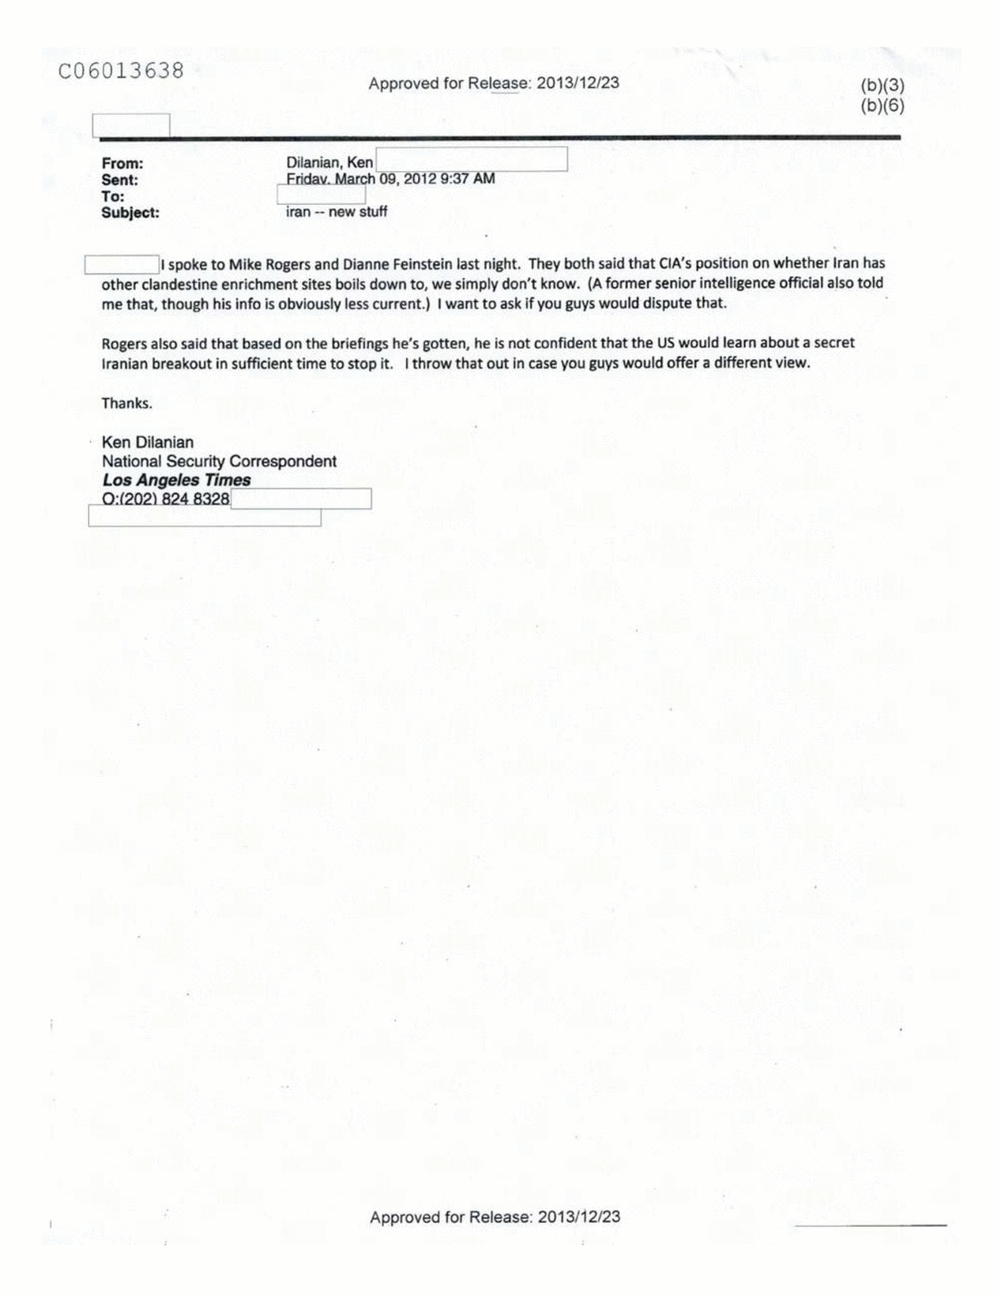 Page 477 from Email Correspondence Between Reporters and CIA Flacks